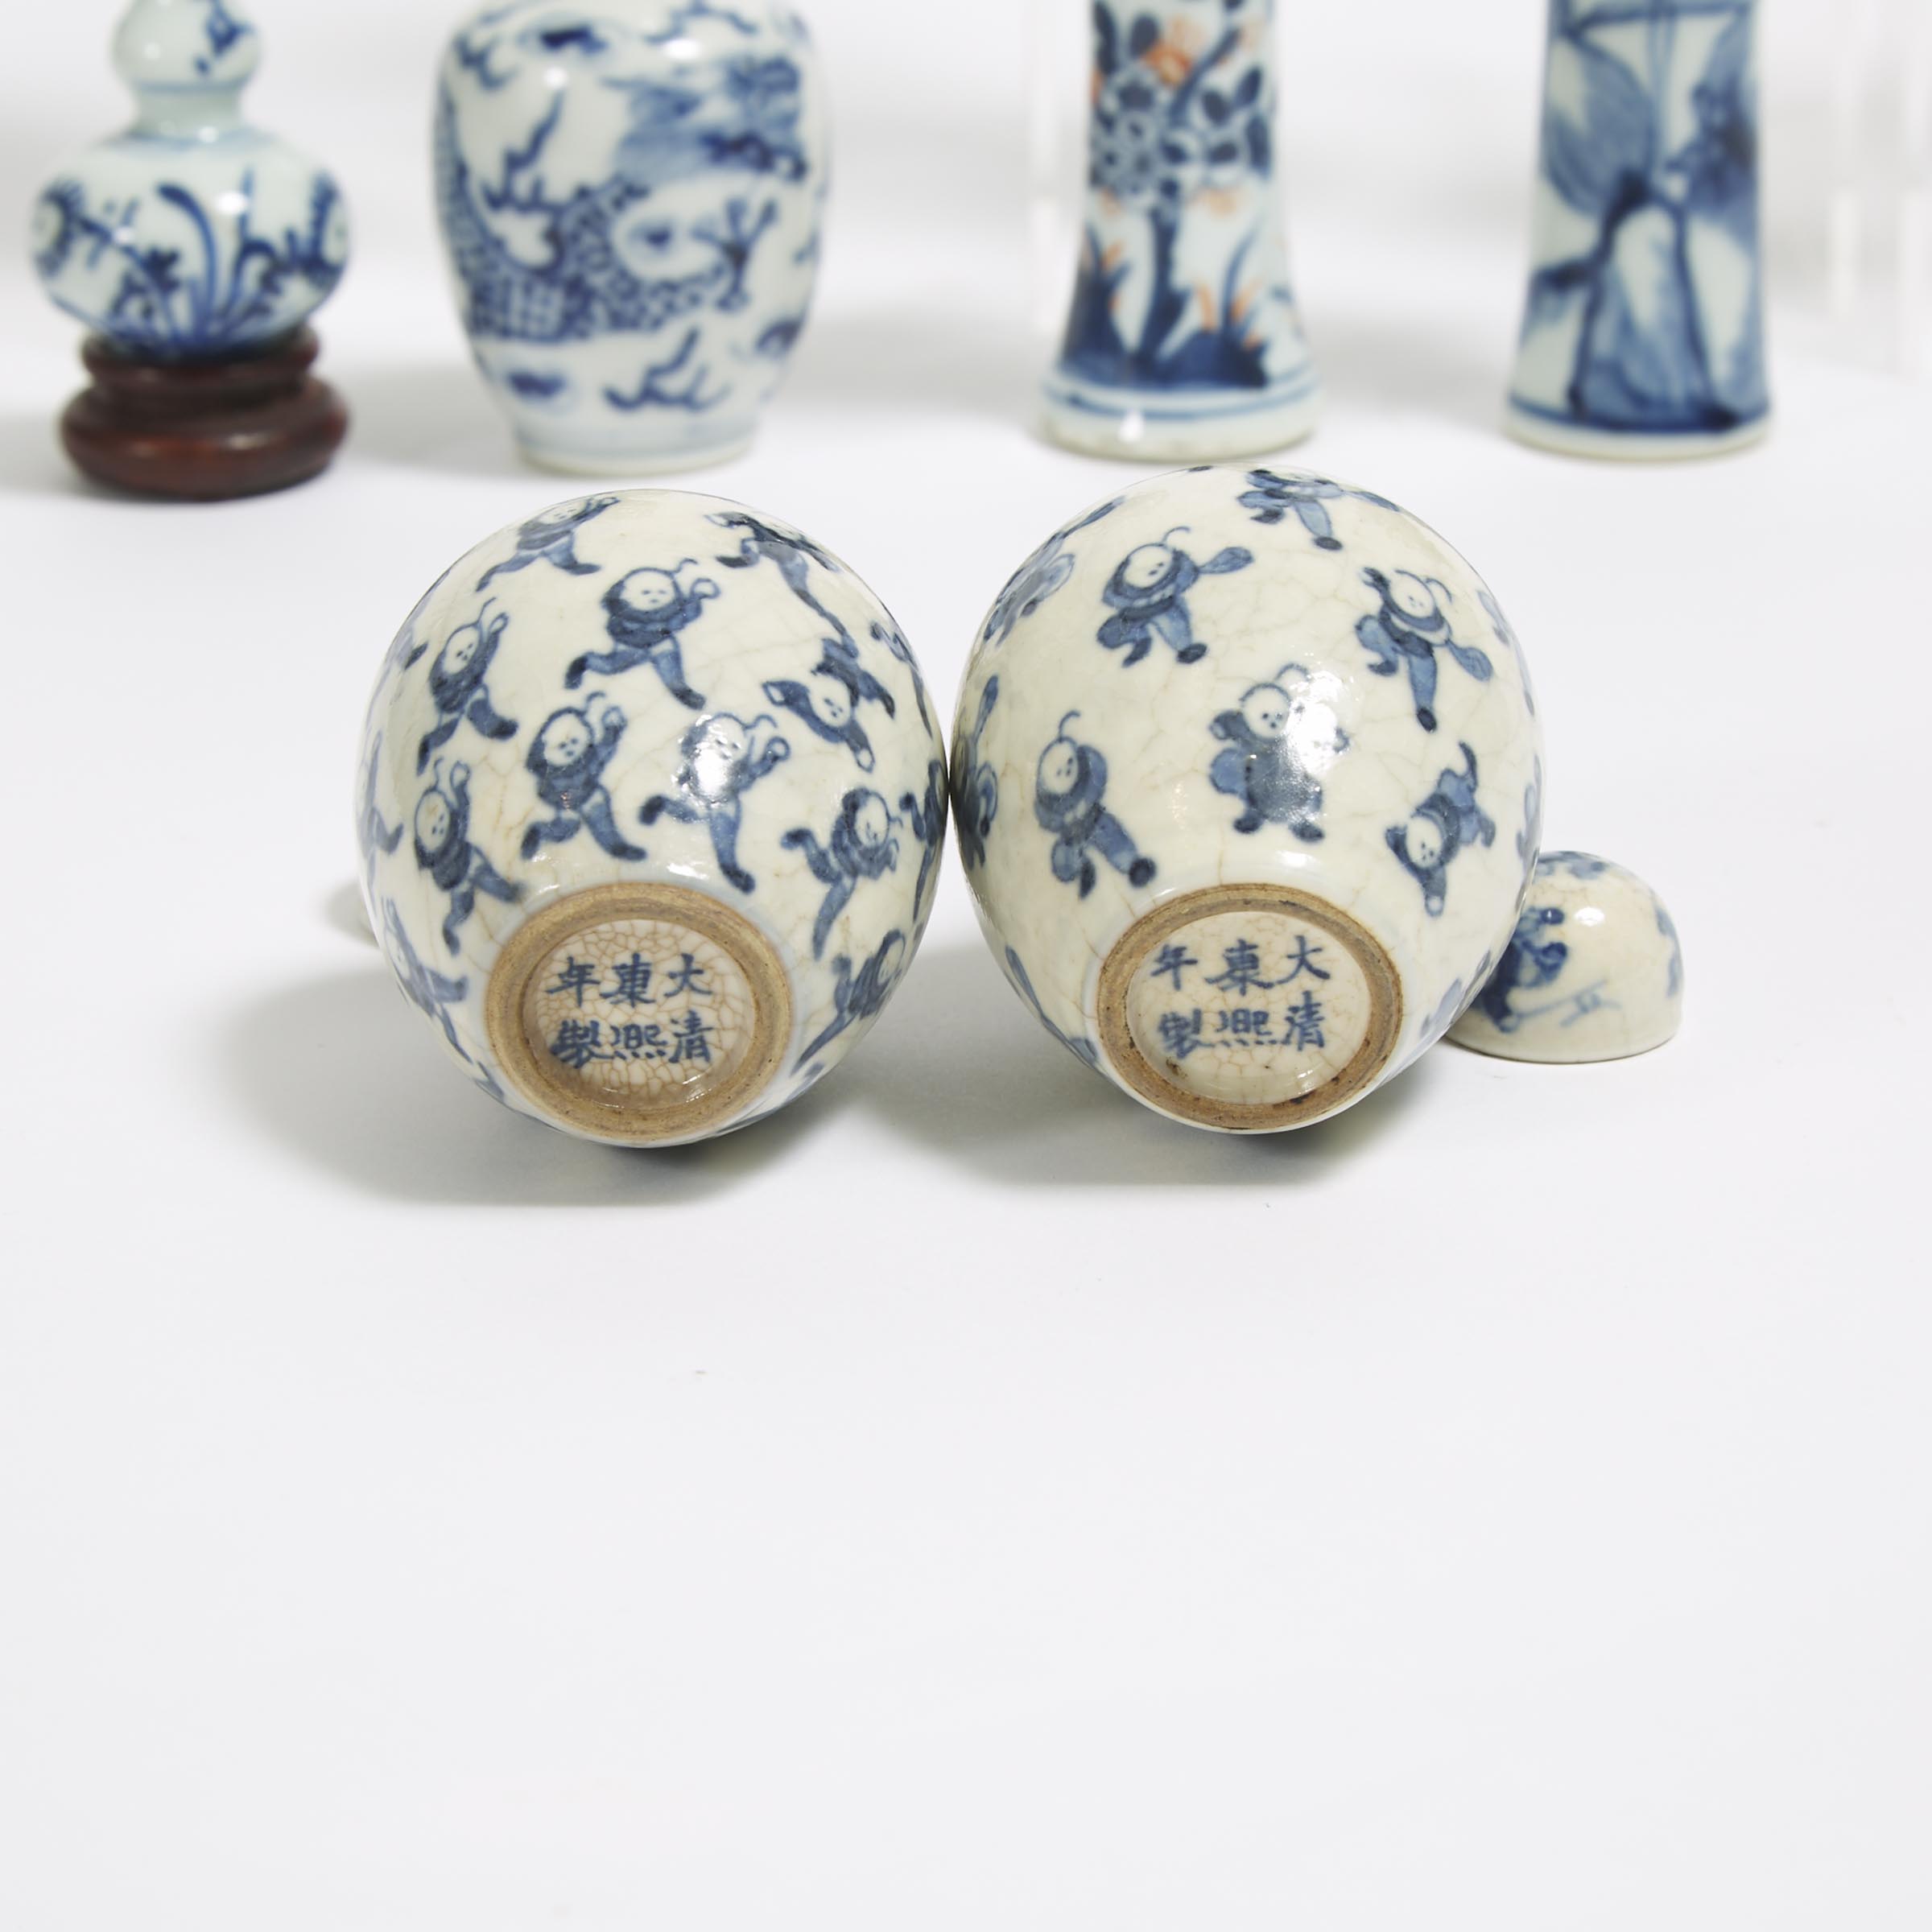 A Group of Eleven Miniature Blue and White Garnitures, 19th Century